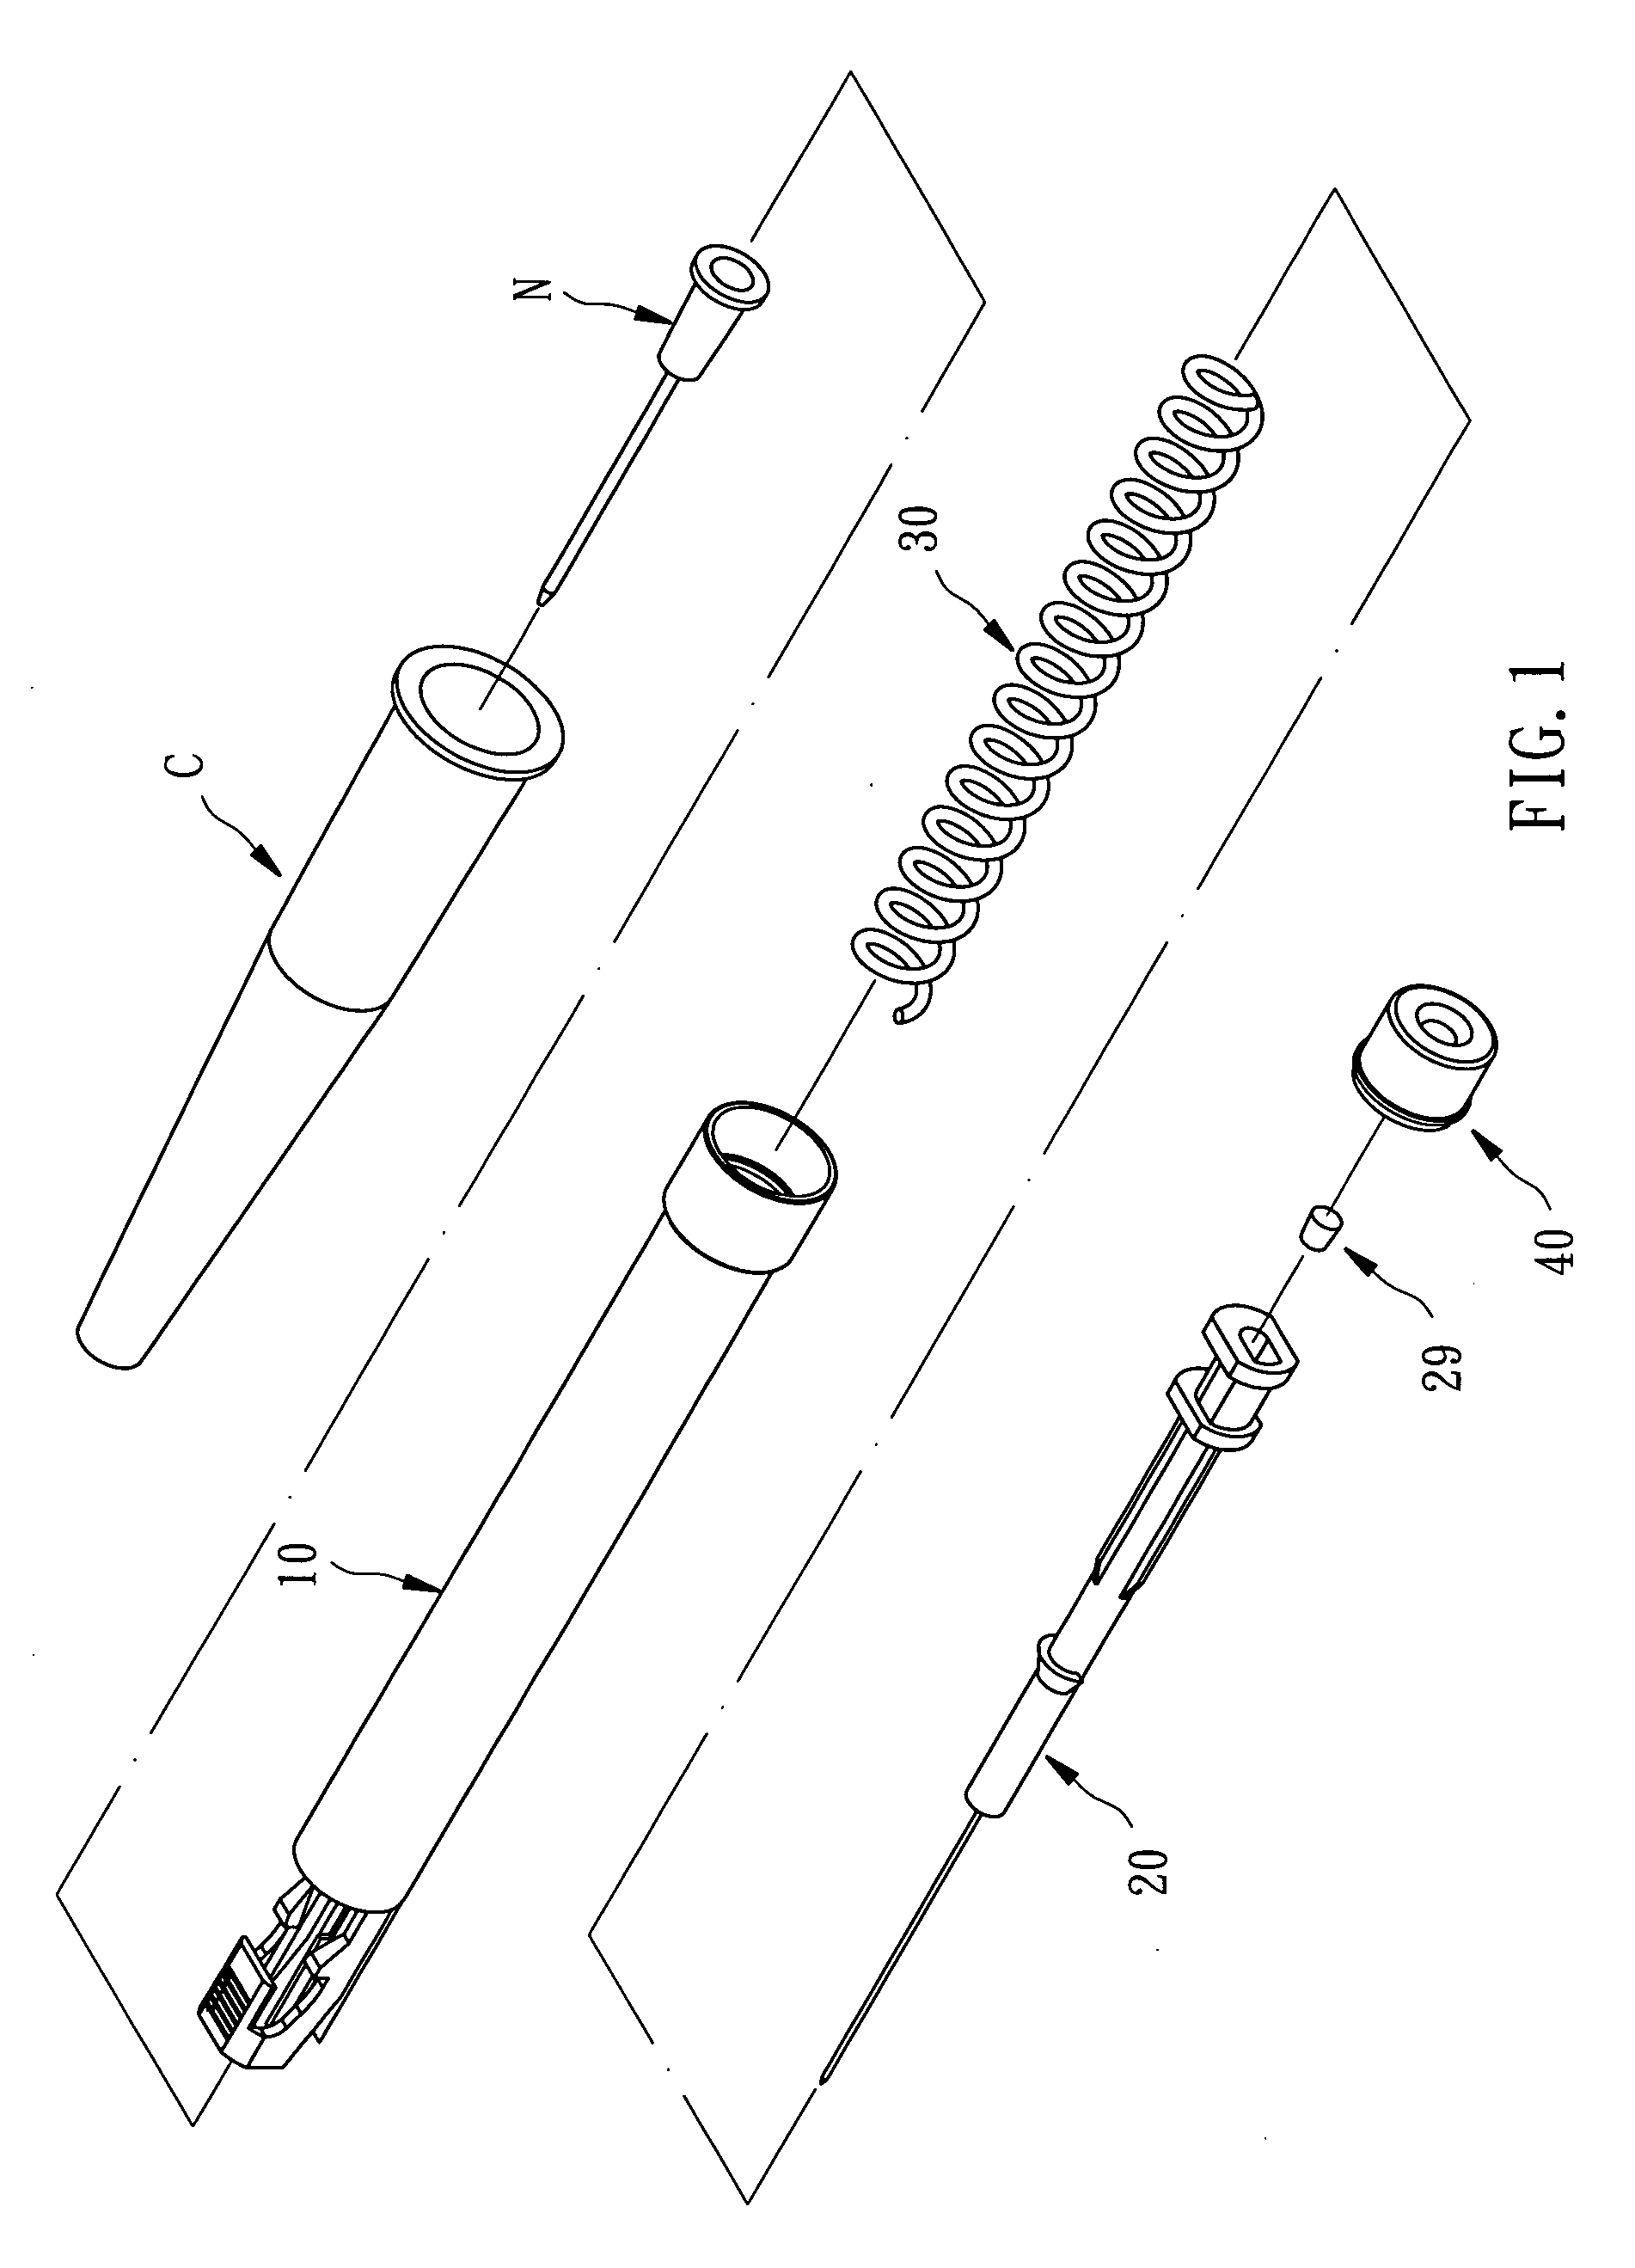 Intravenous catheter insertion device with retractable needle